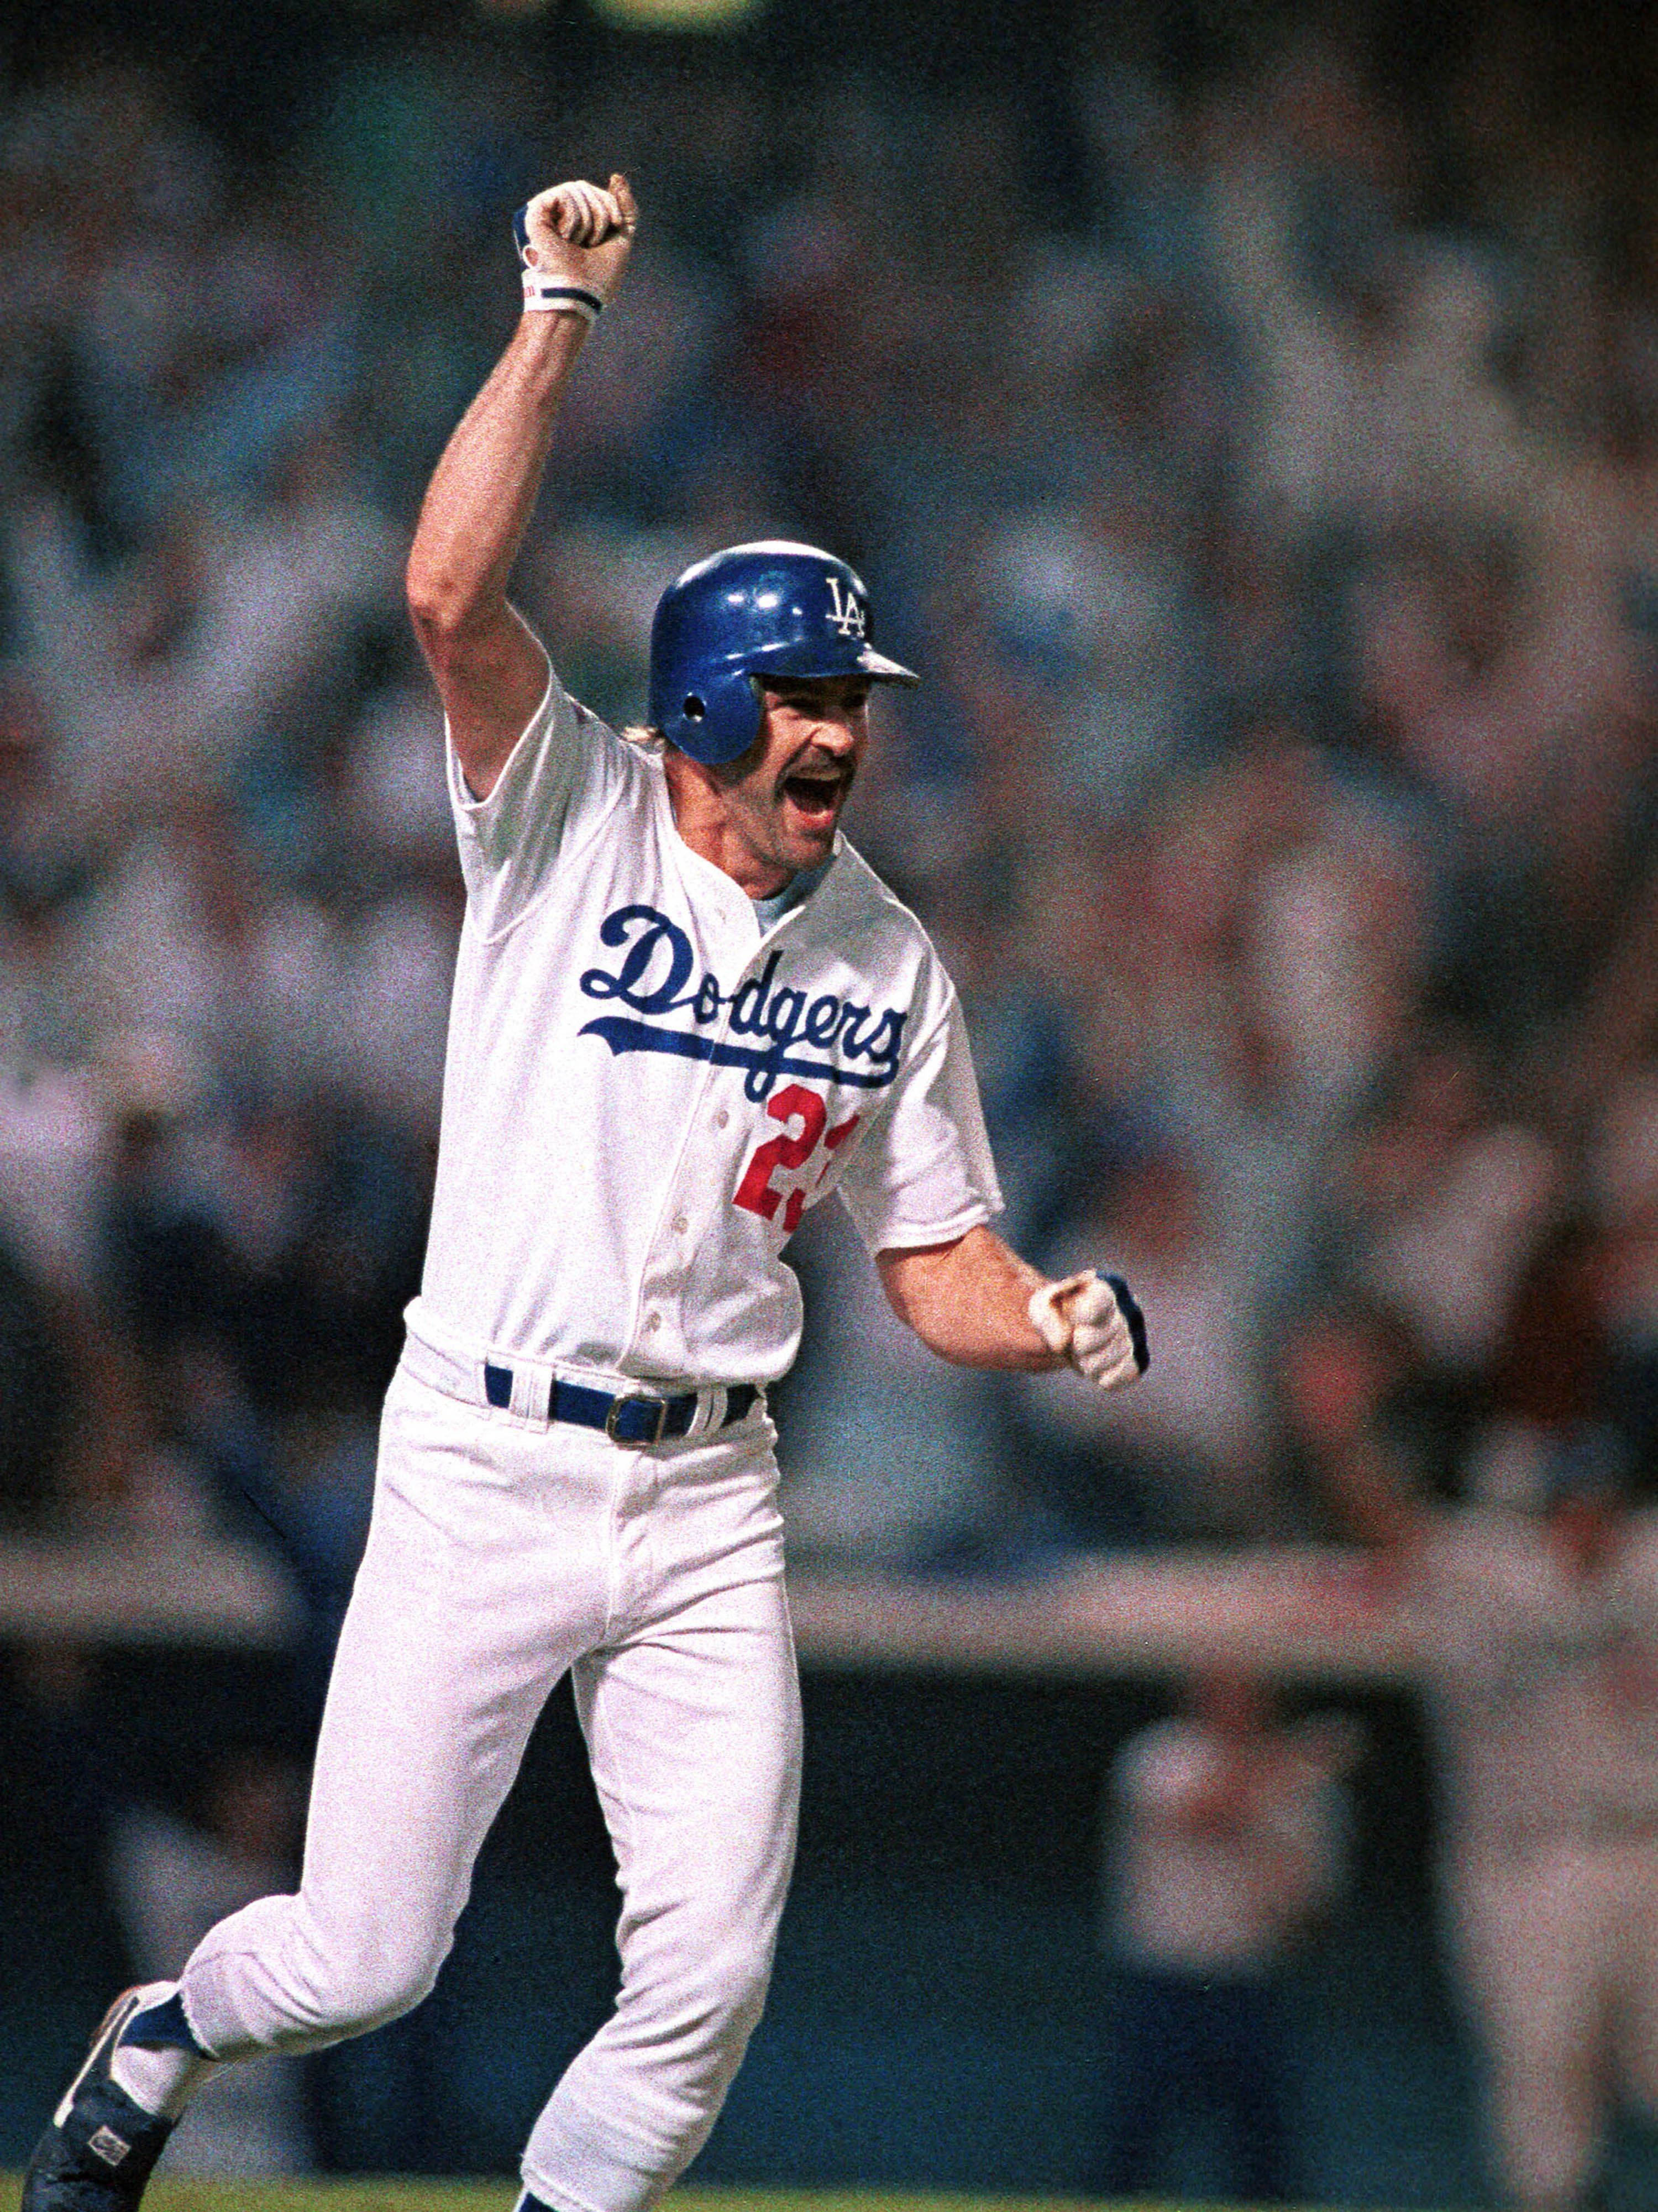 Oct. 15, 1988: Game 1, Los Angeles Dodgers Versus the Oakland Athletics.  Dodger Manager Tommy Lasorda calls for a pinch hitter in the bottom of the 9th, for his pitcher, Alejandro Pena, and puts in Kirk Gibson, who prior to the game had trouble even walking, it was widely known his knees were in bad condition.  Gibson would hit a walk-off home run to win the game for the Dodgers.